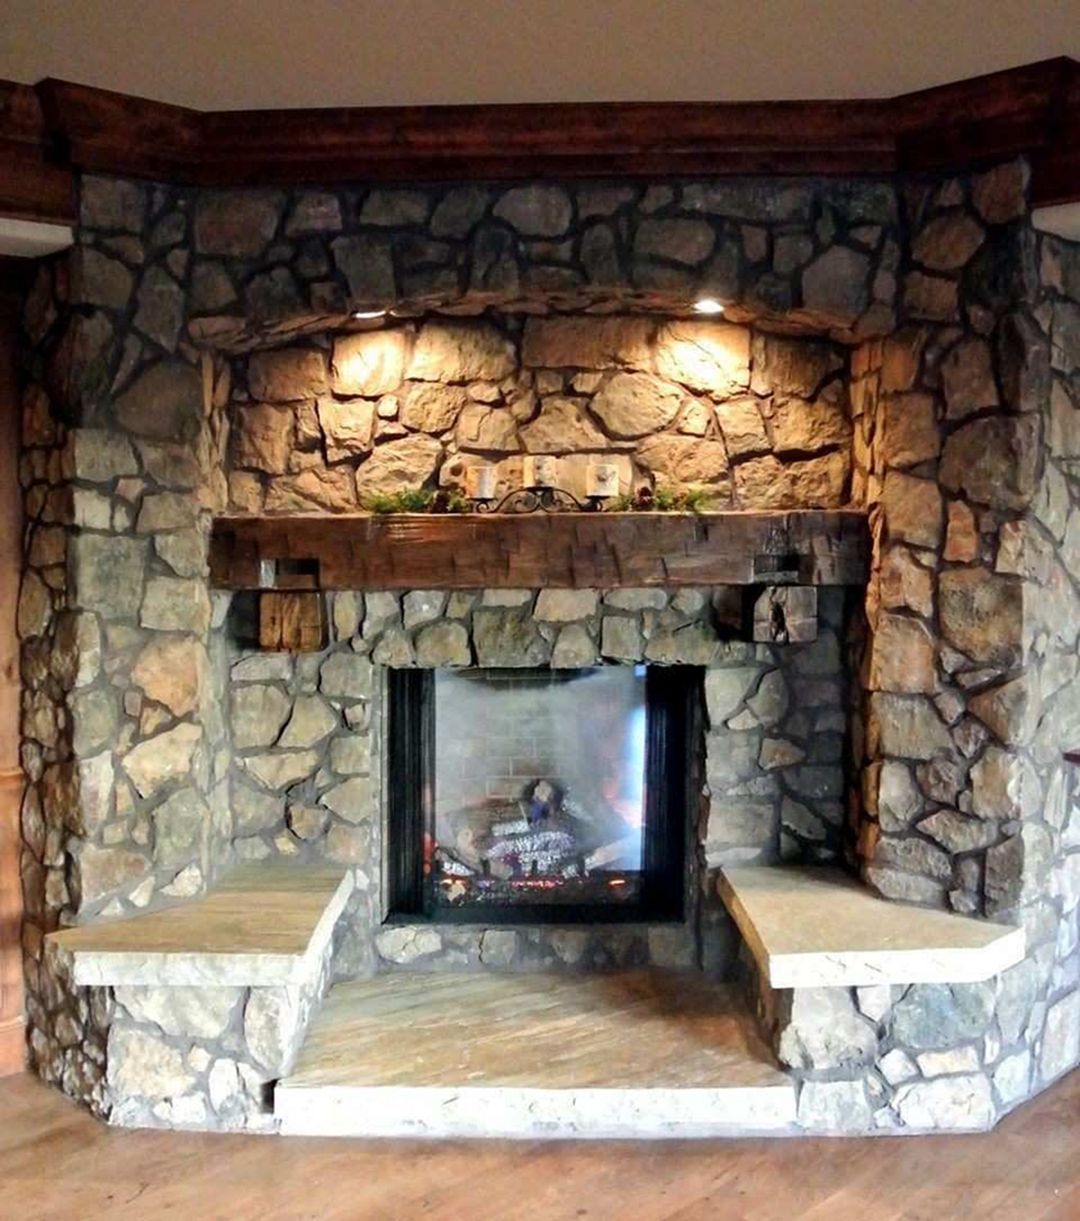 Cozy Fireplace Images Lovely 25 Amazing Rustic Fireplace Design Ideas for Cozy Winter